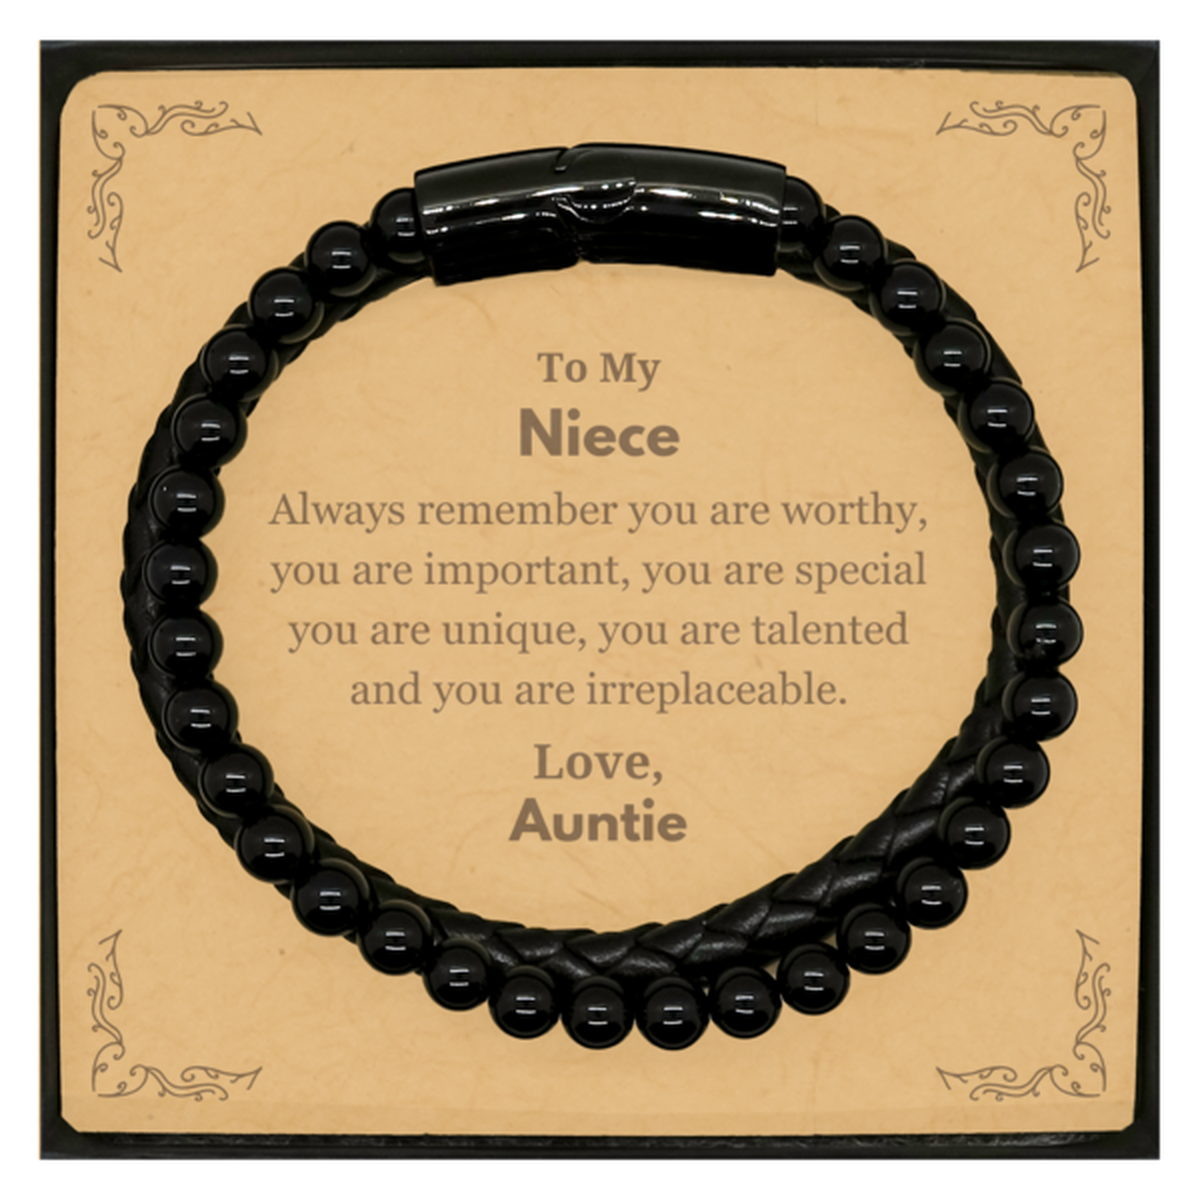 Niece Birthday Gifts from Auntie, Inspirational Stone Leather Bracelets for Niece Christmas Graduation Gifts for Niece Always remember you are worthy, you are important. Love, Auntie